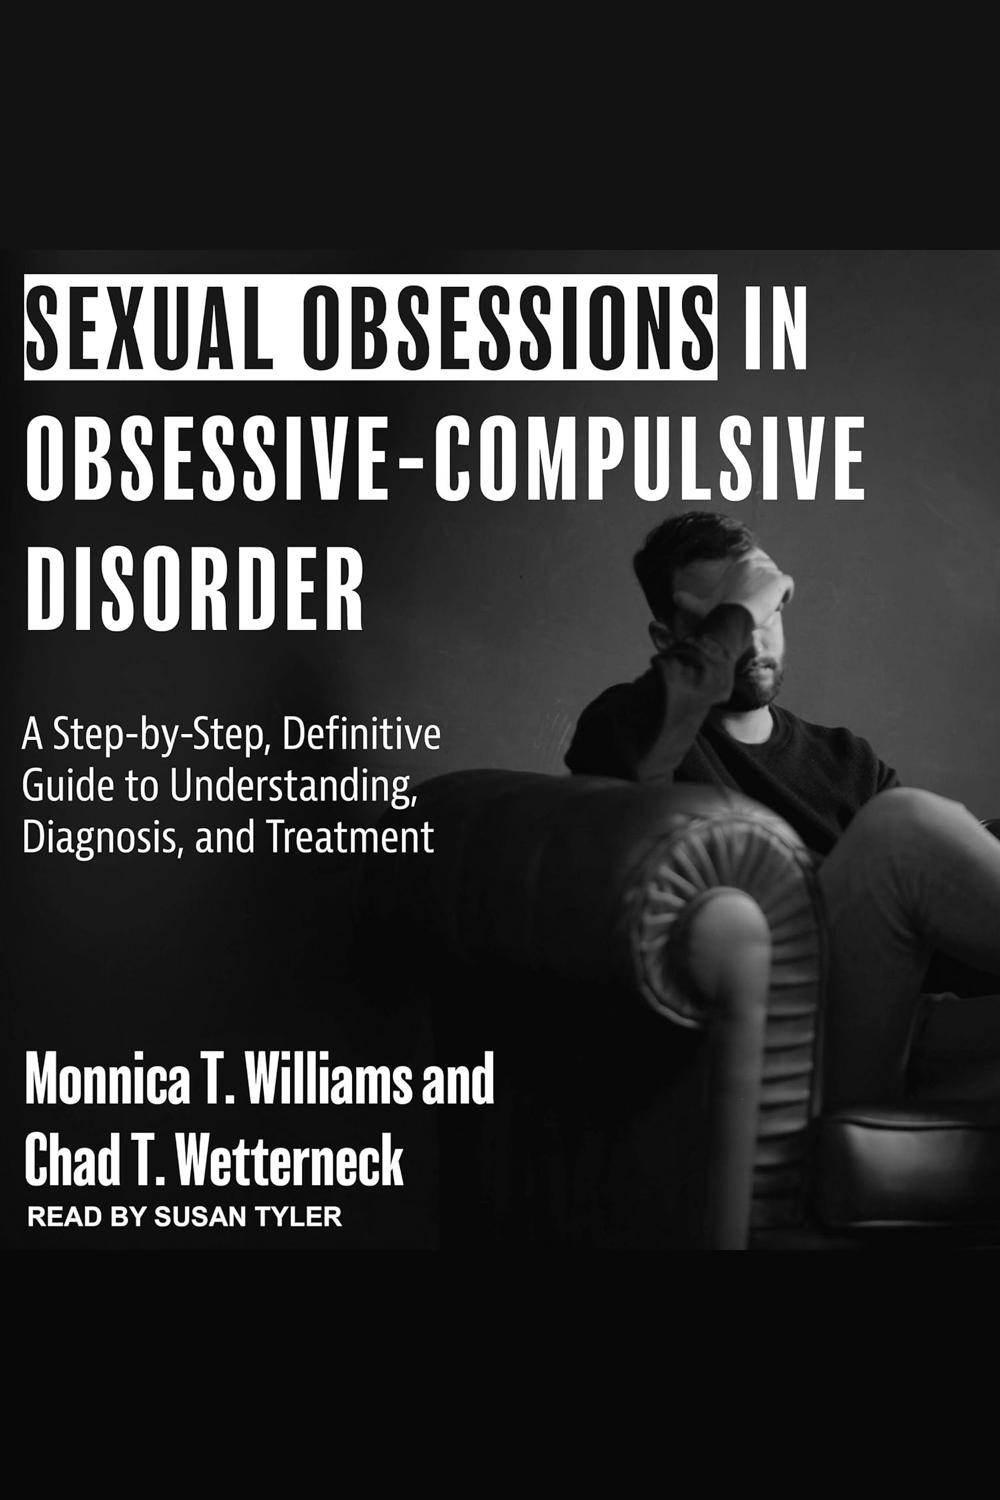 book - Sexual Obsessions in OCD